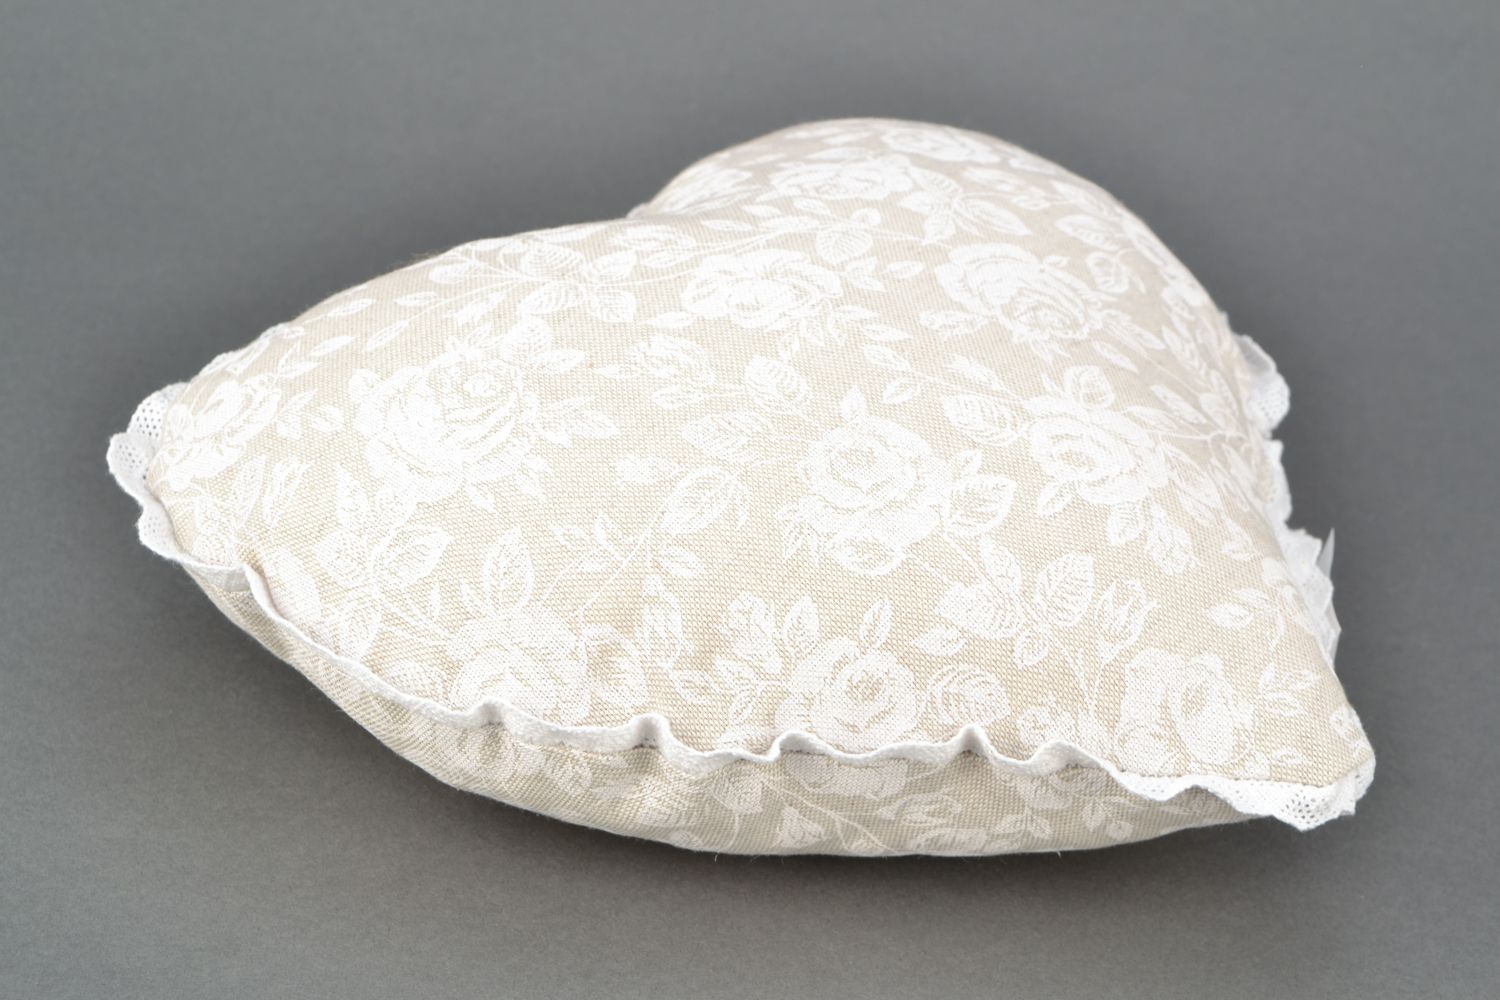 Heart-shaped decorative pillow made of fabric and lace White Rose photo 3